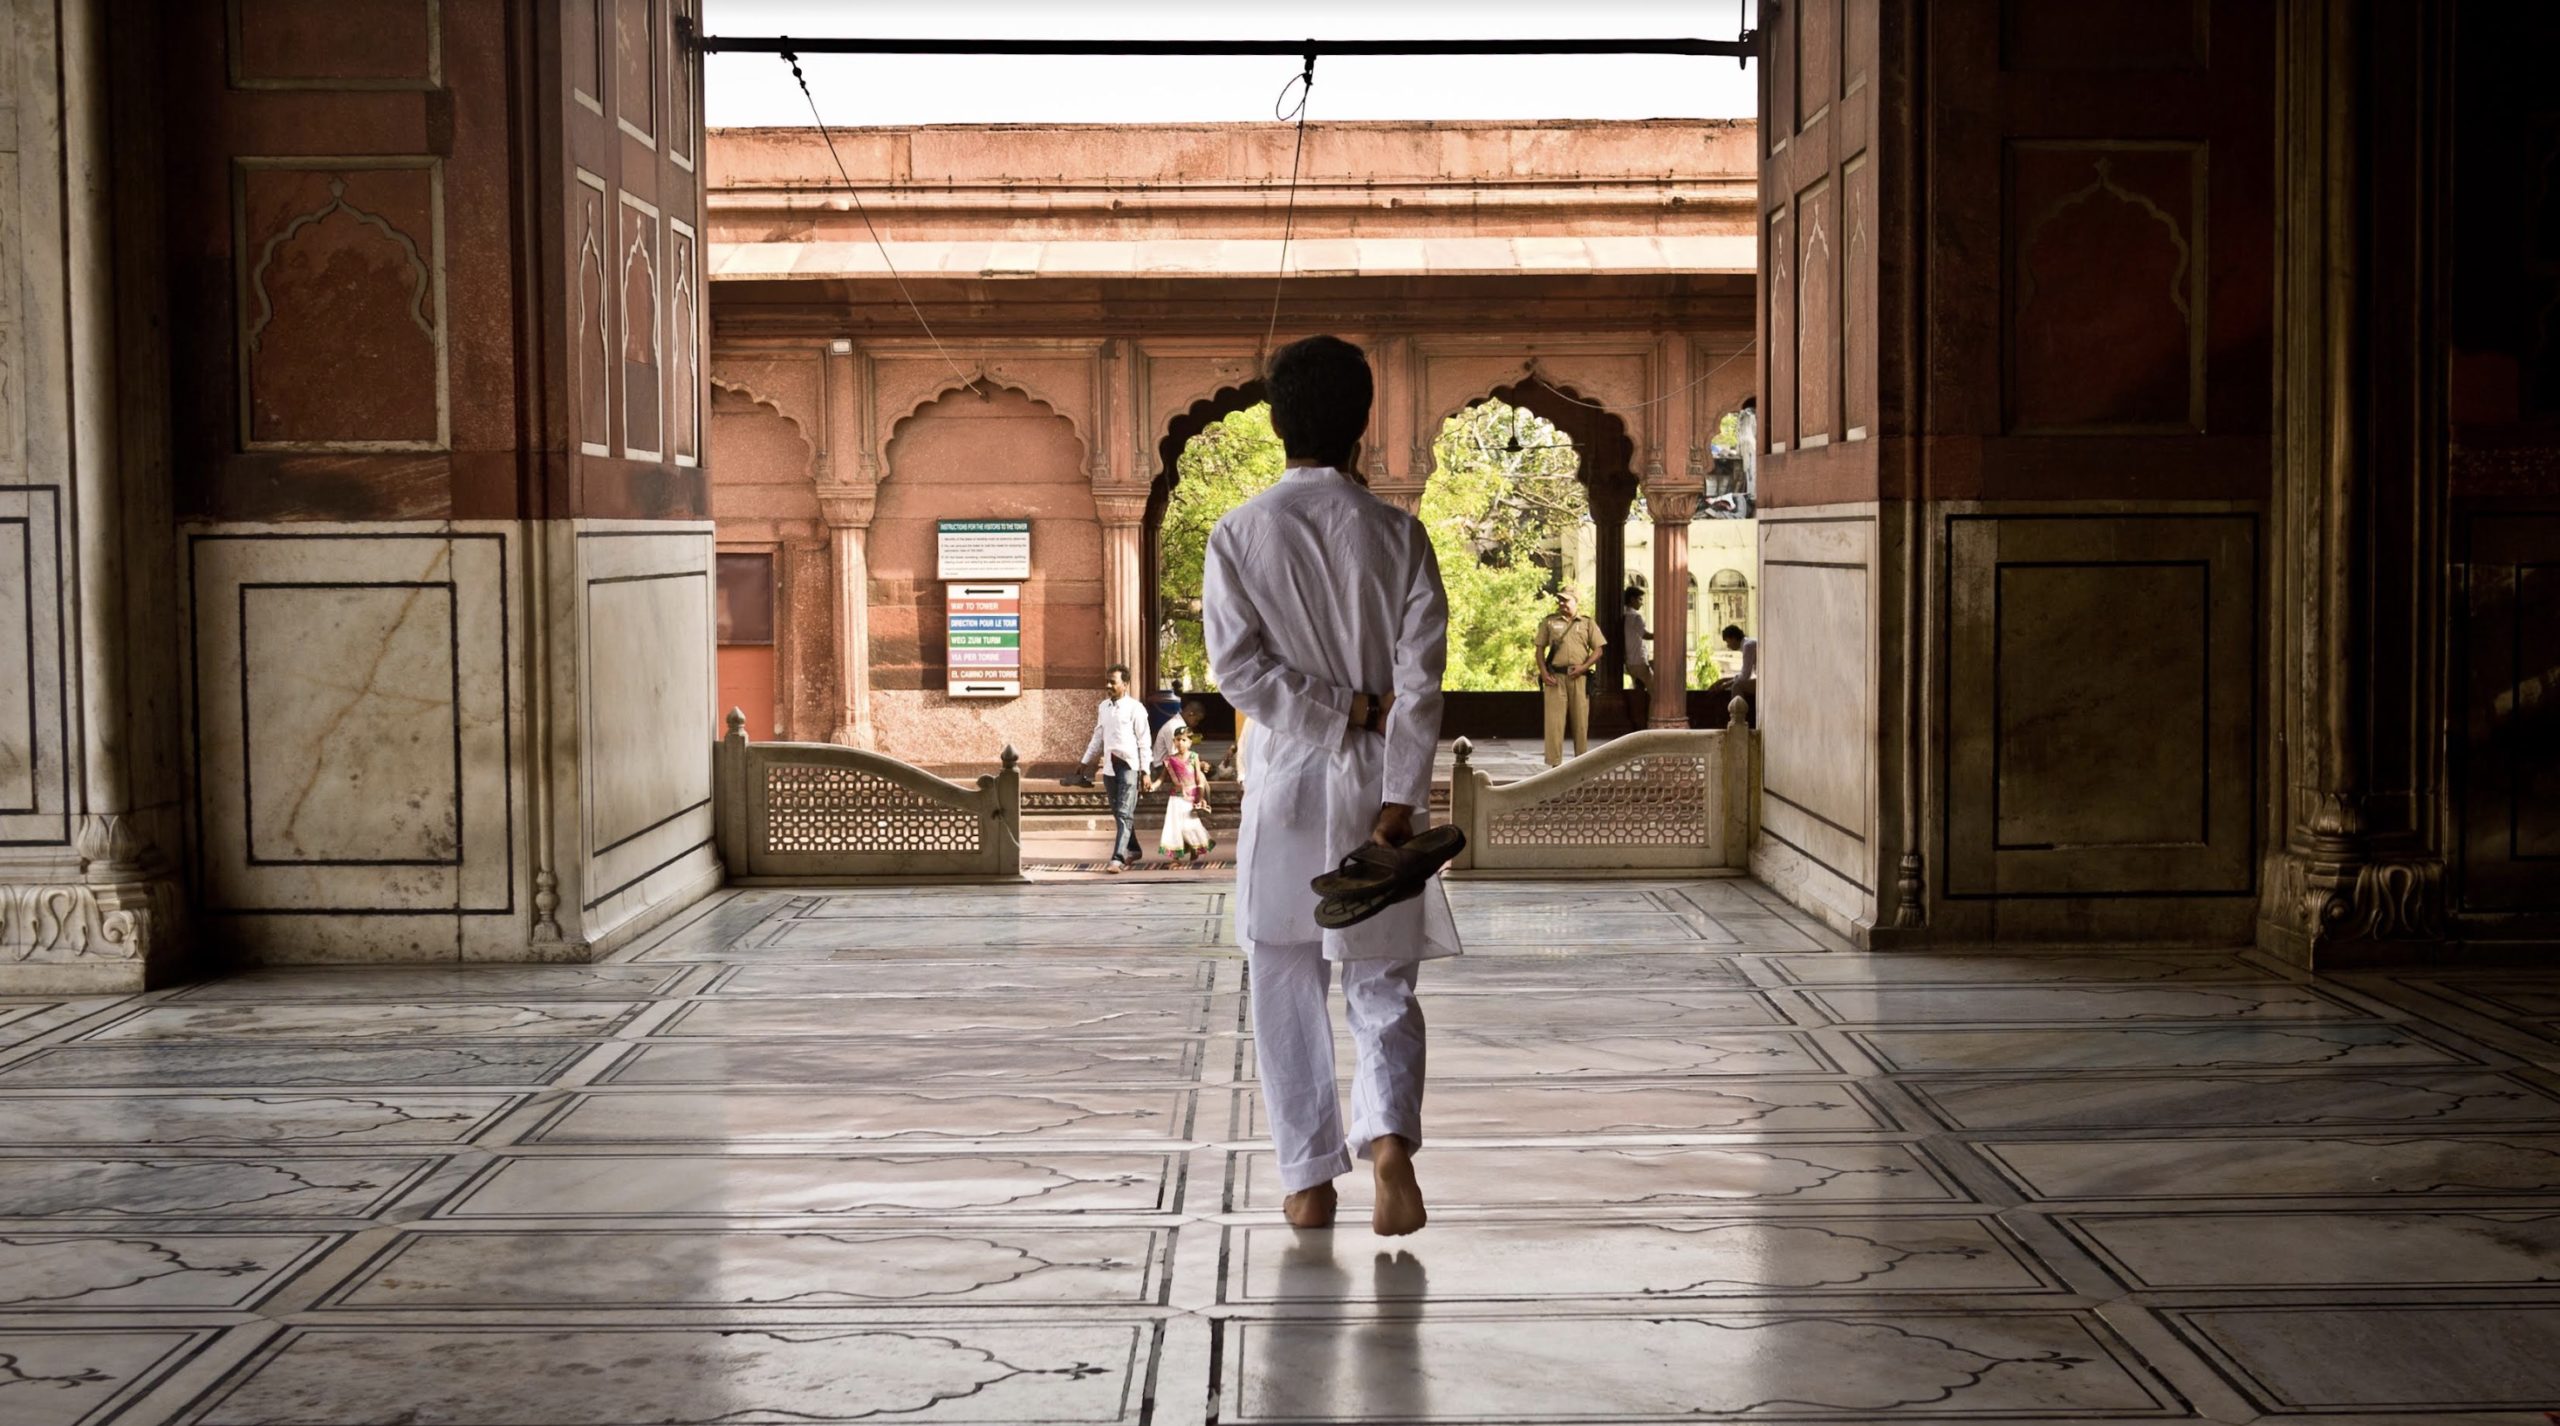 Zain Alam walking with his back to the camera in a partially enclosed area. He is dressed entirely in white.